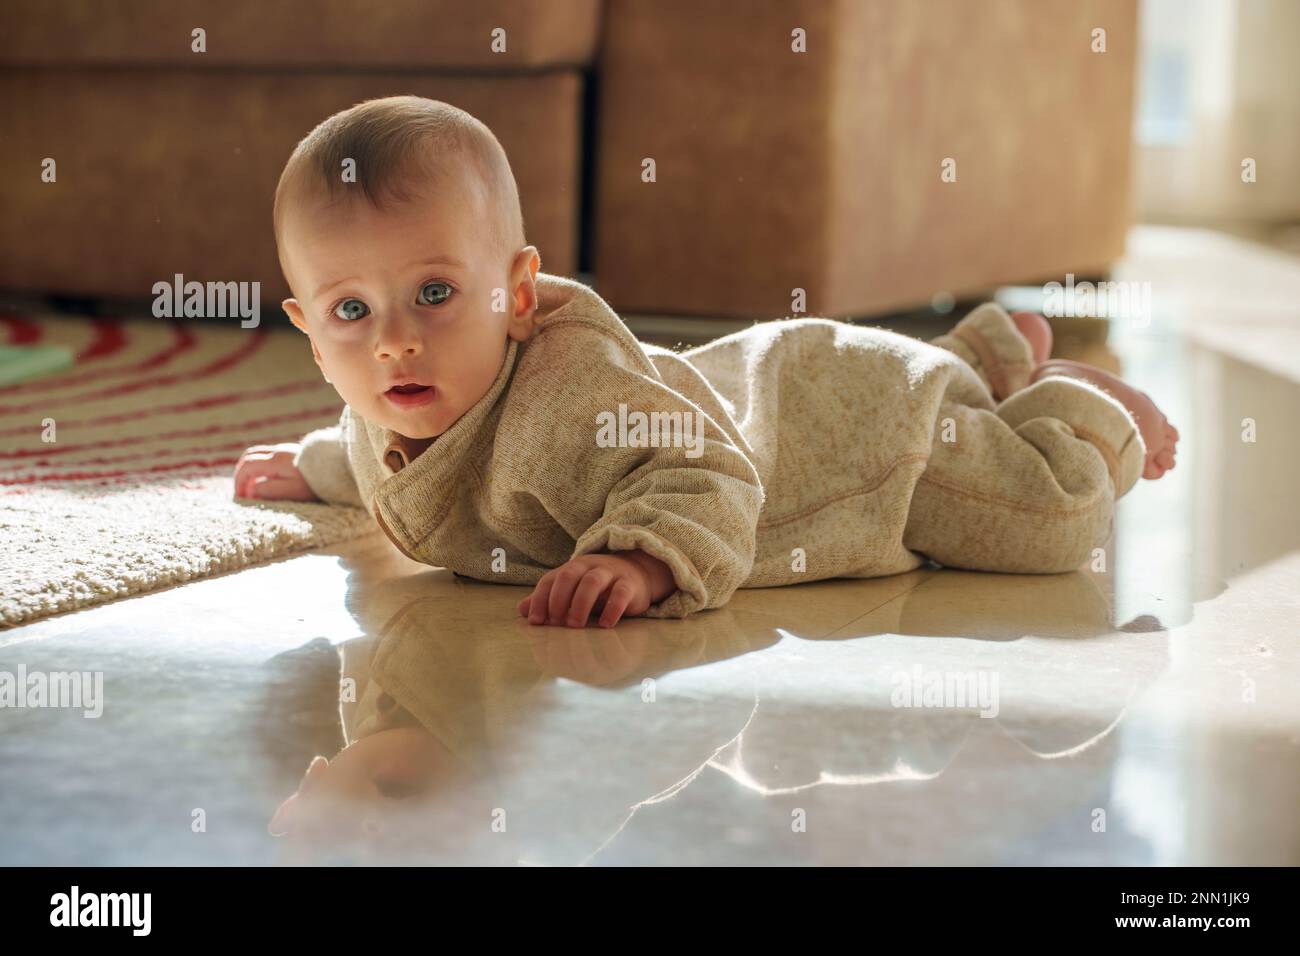 Baby crawling on tiled floor Stock Photo